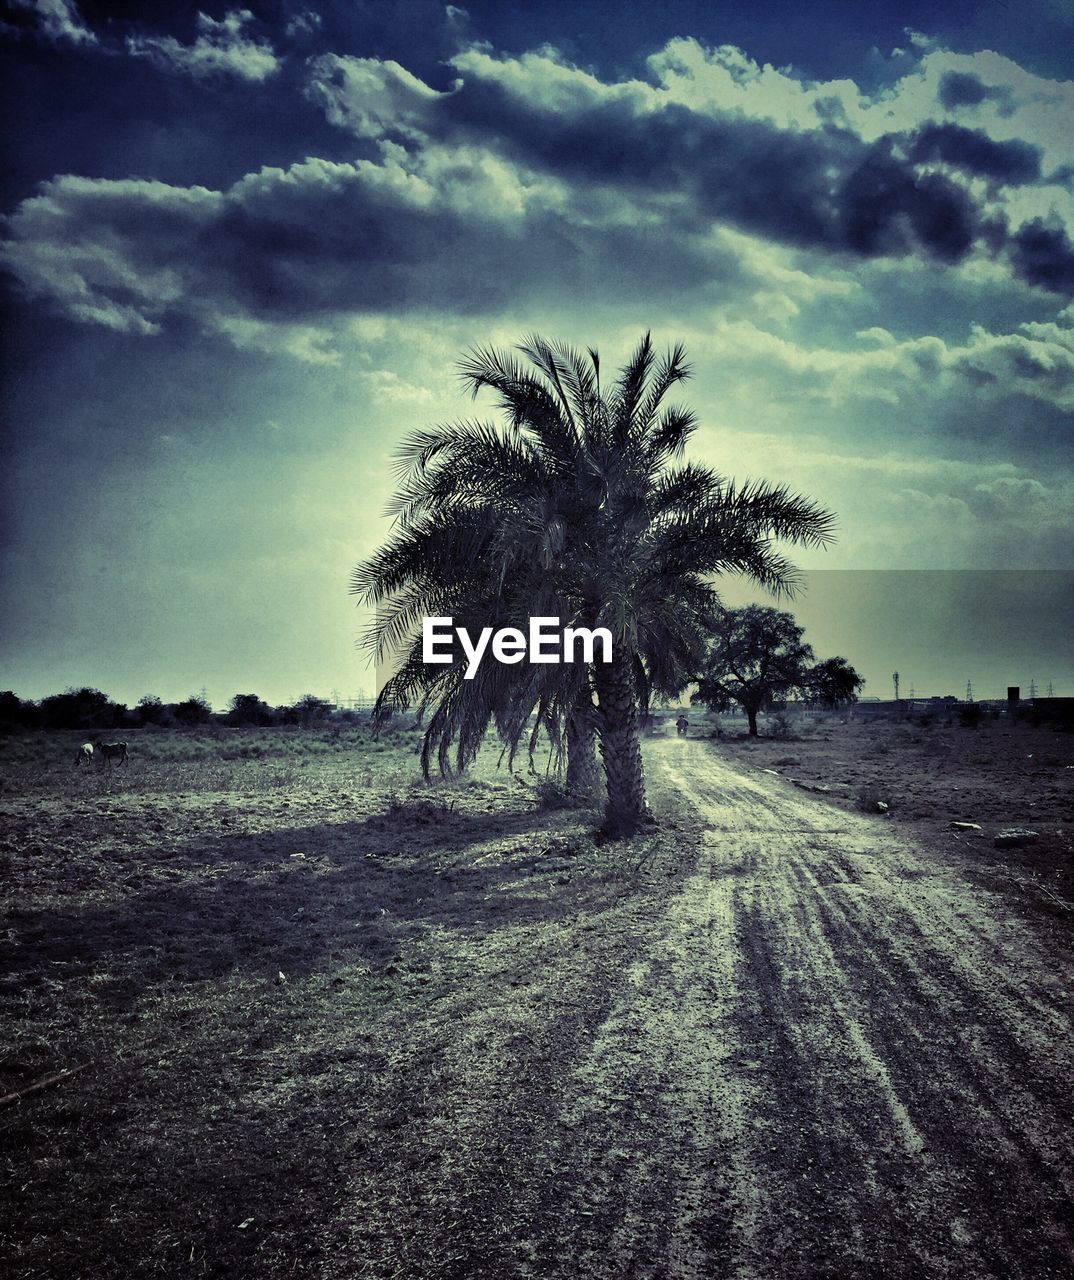 Dirt road by date palm tree on field against sky